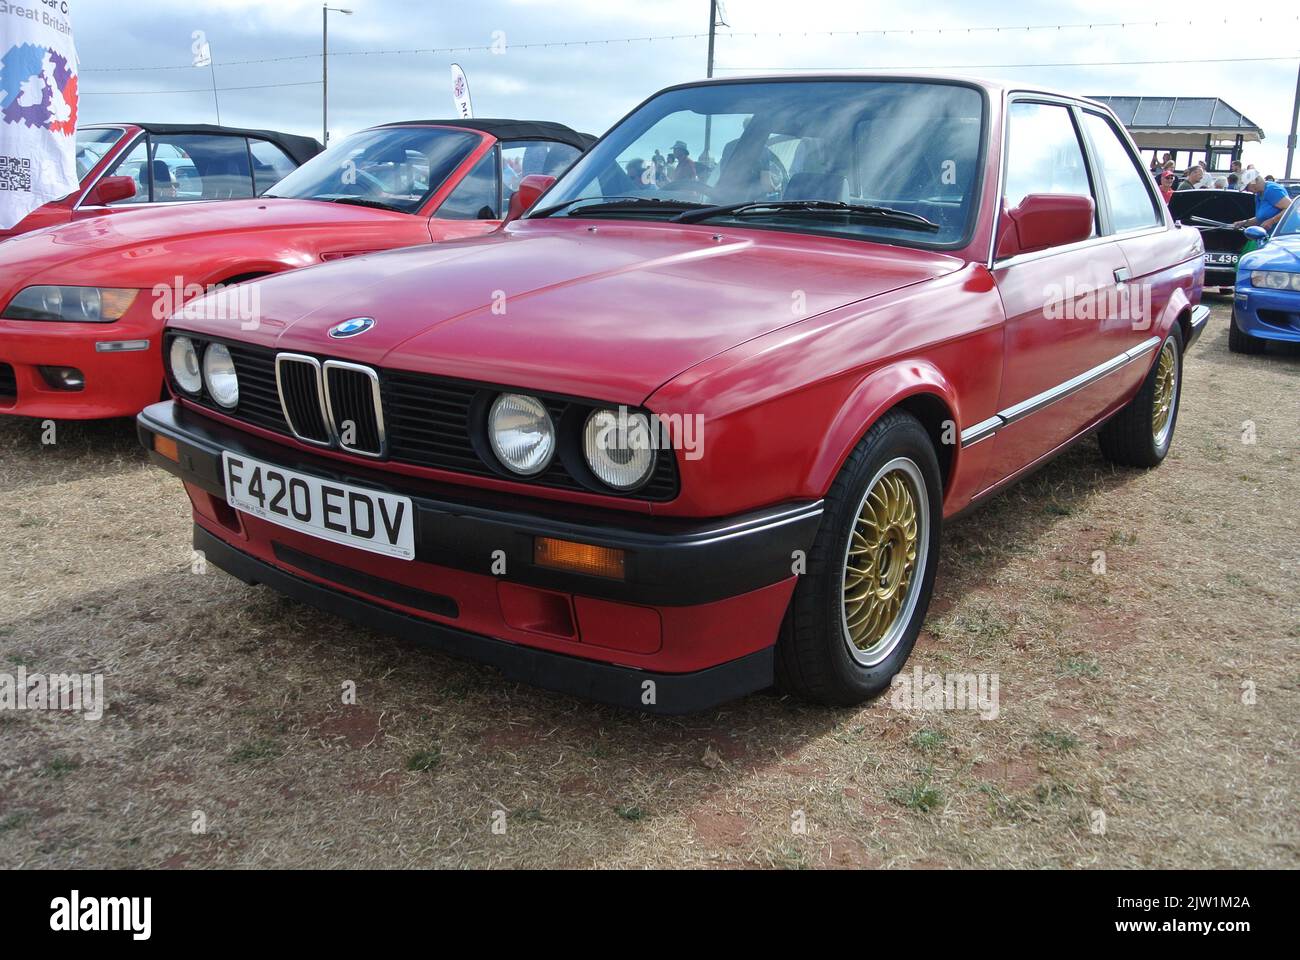 A 1988 BMW 3 series parked on display at the English Riviera classic car show, Paignton, Devon, England, UK. Stock Photo